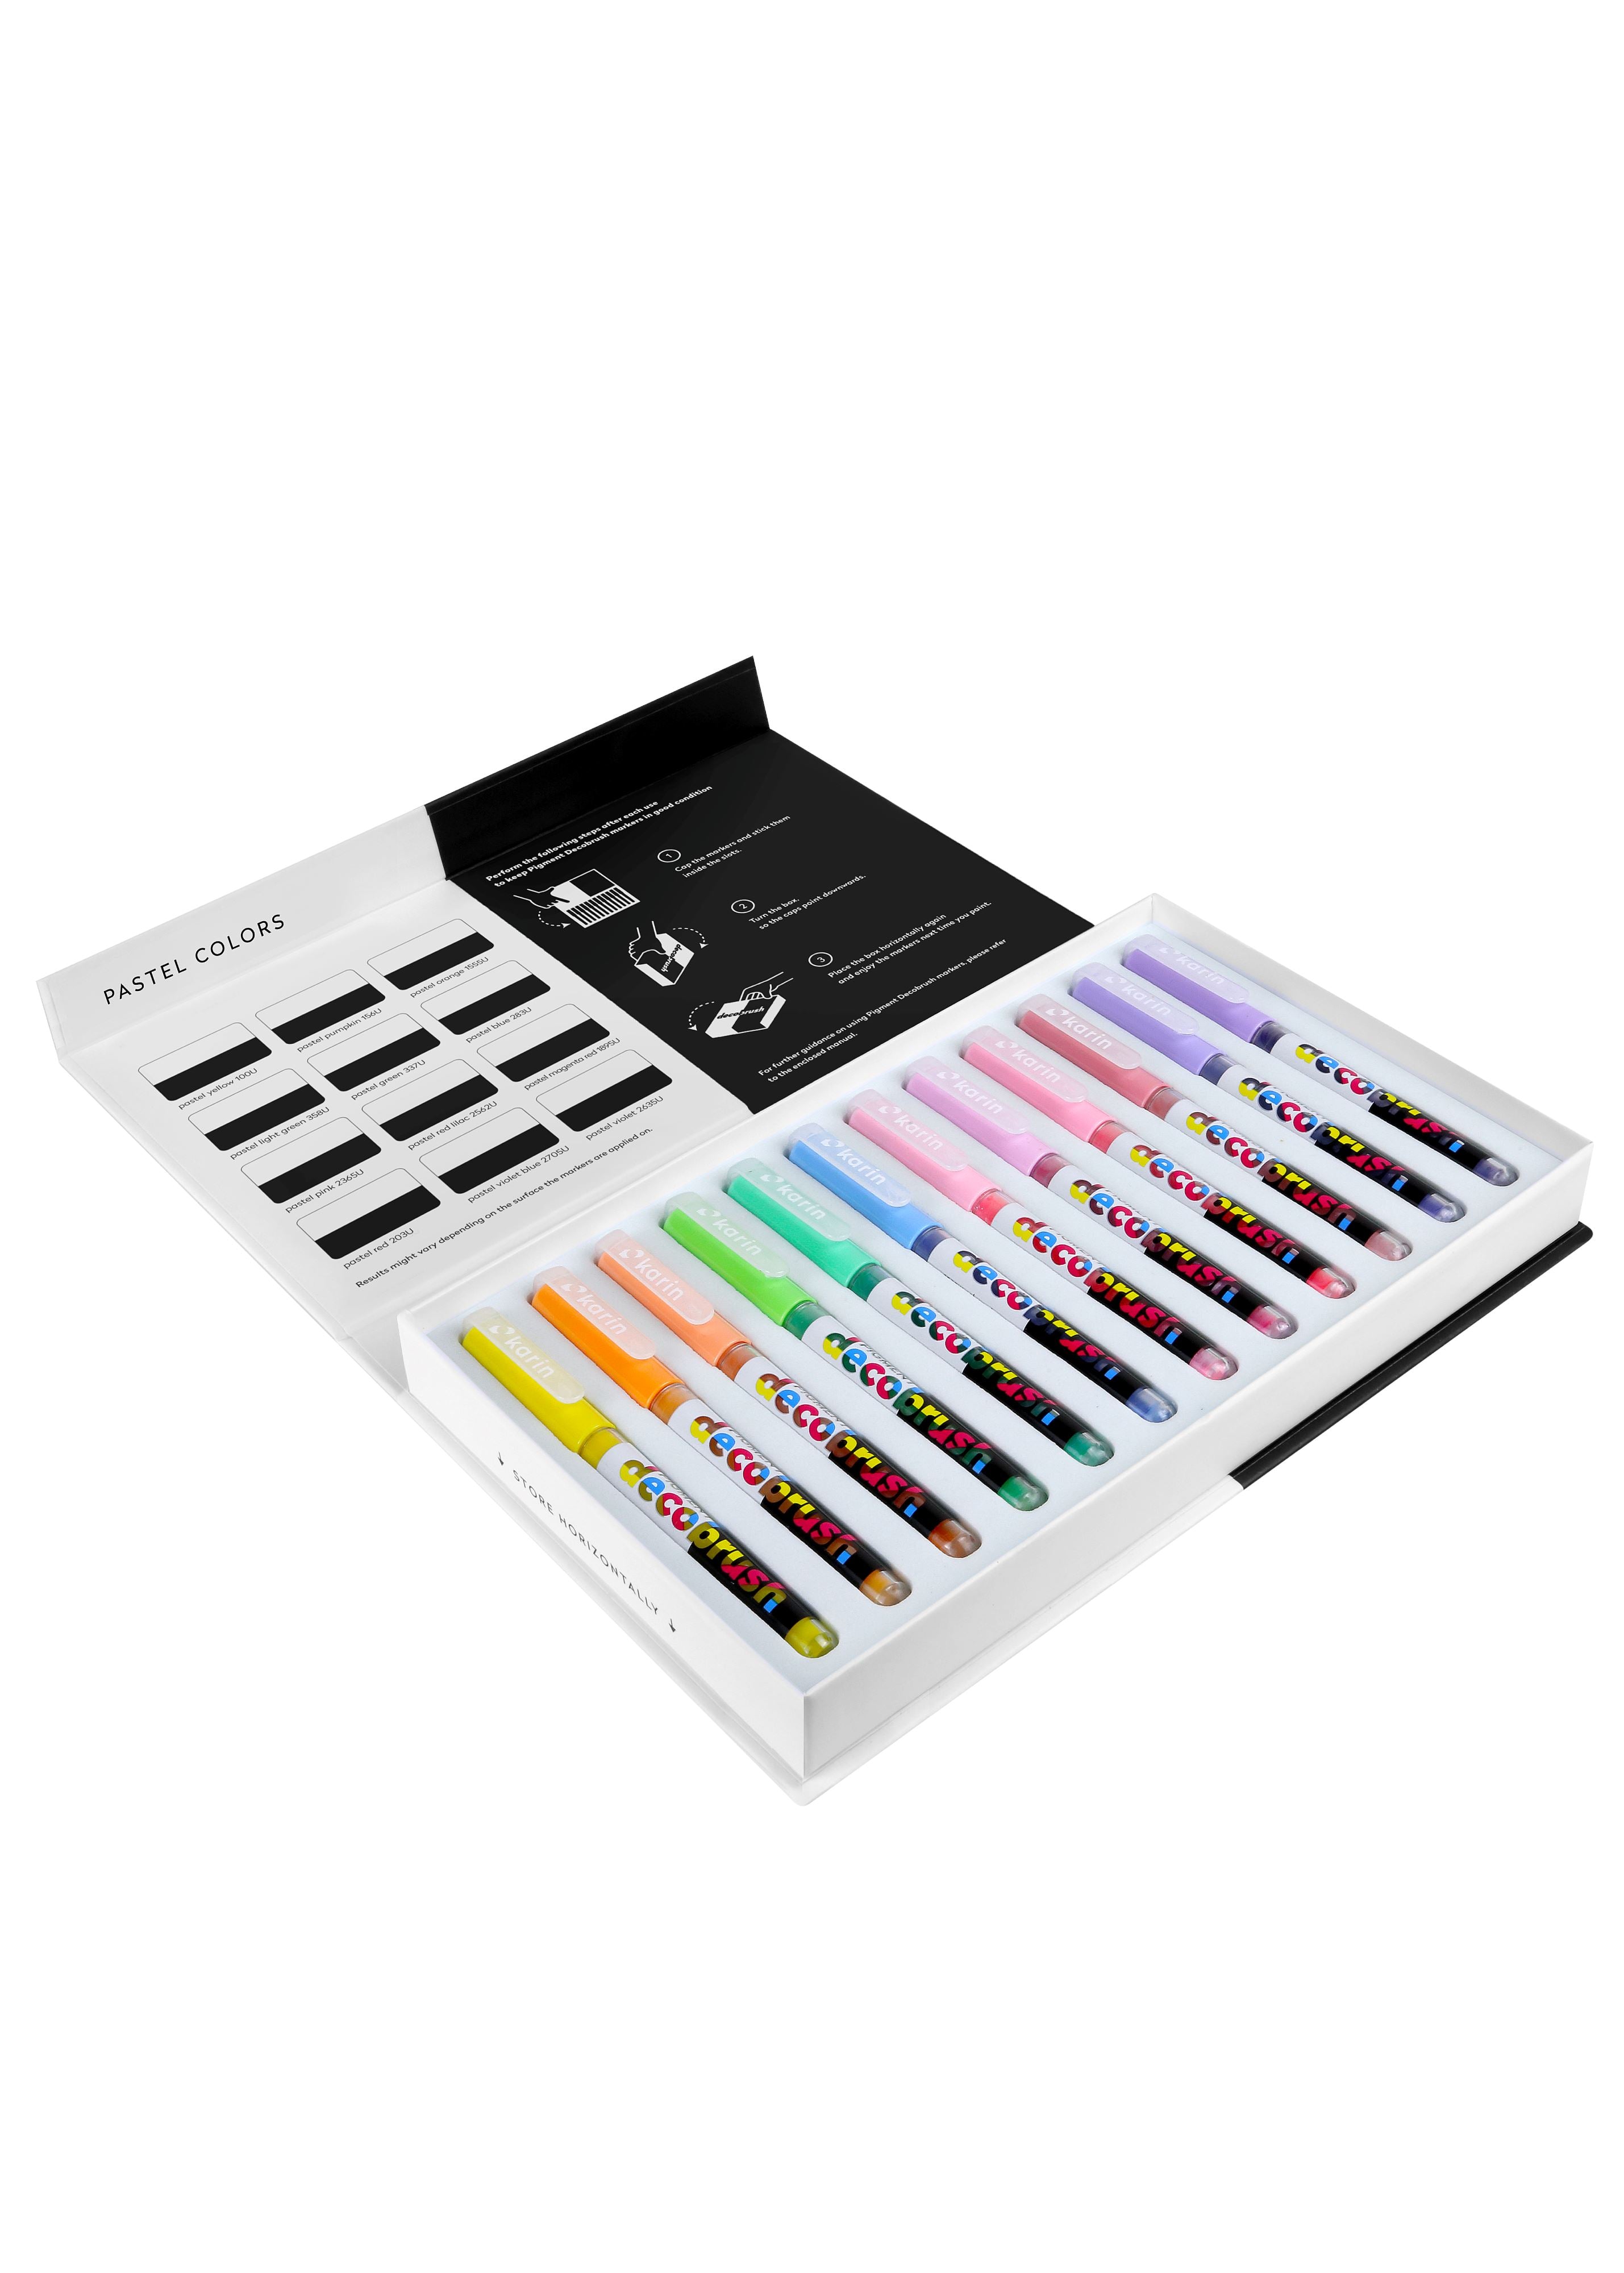 Karin markers Pigment Decobrush | Pastel Colors Collection 12 colors marcadores, plumones Karin